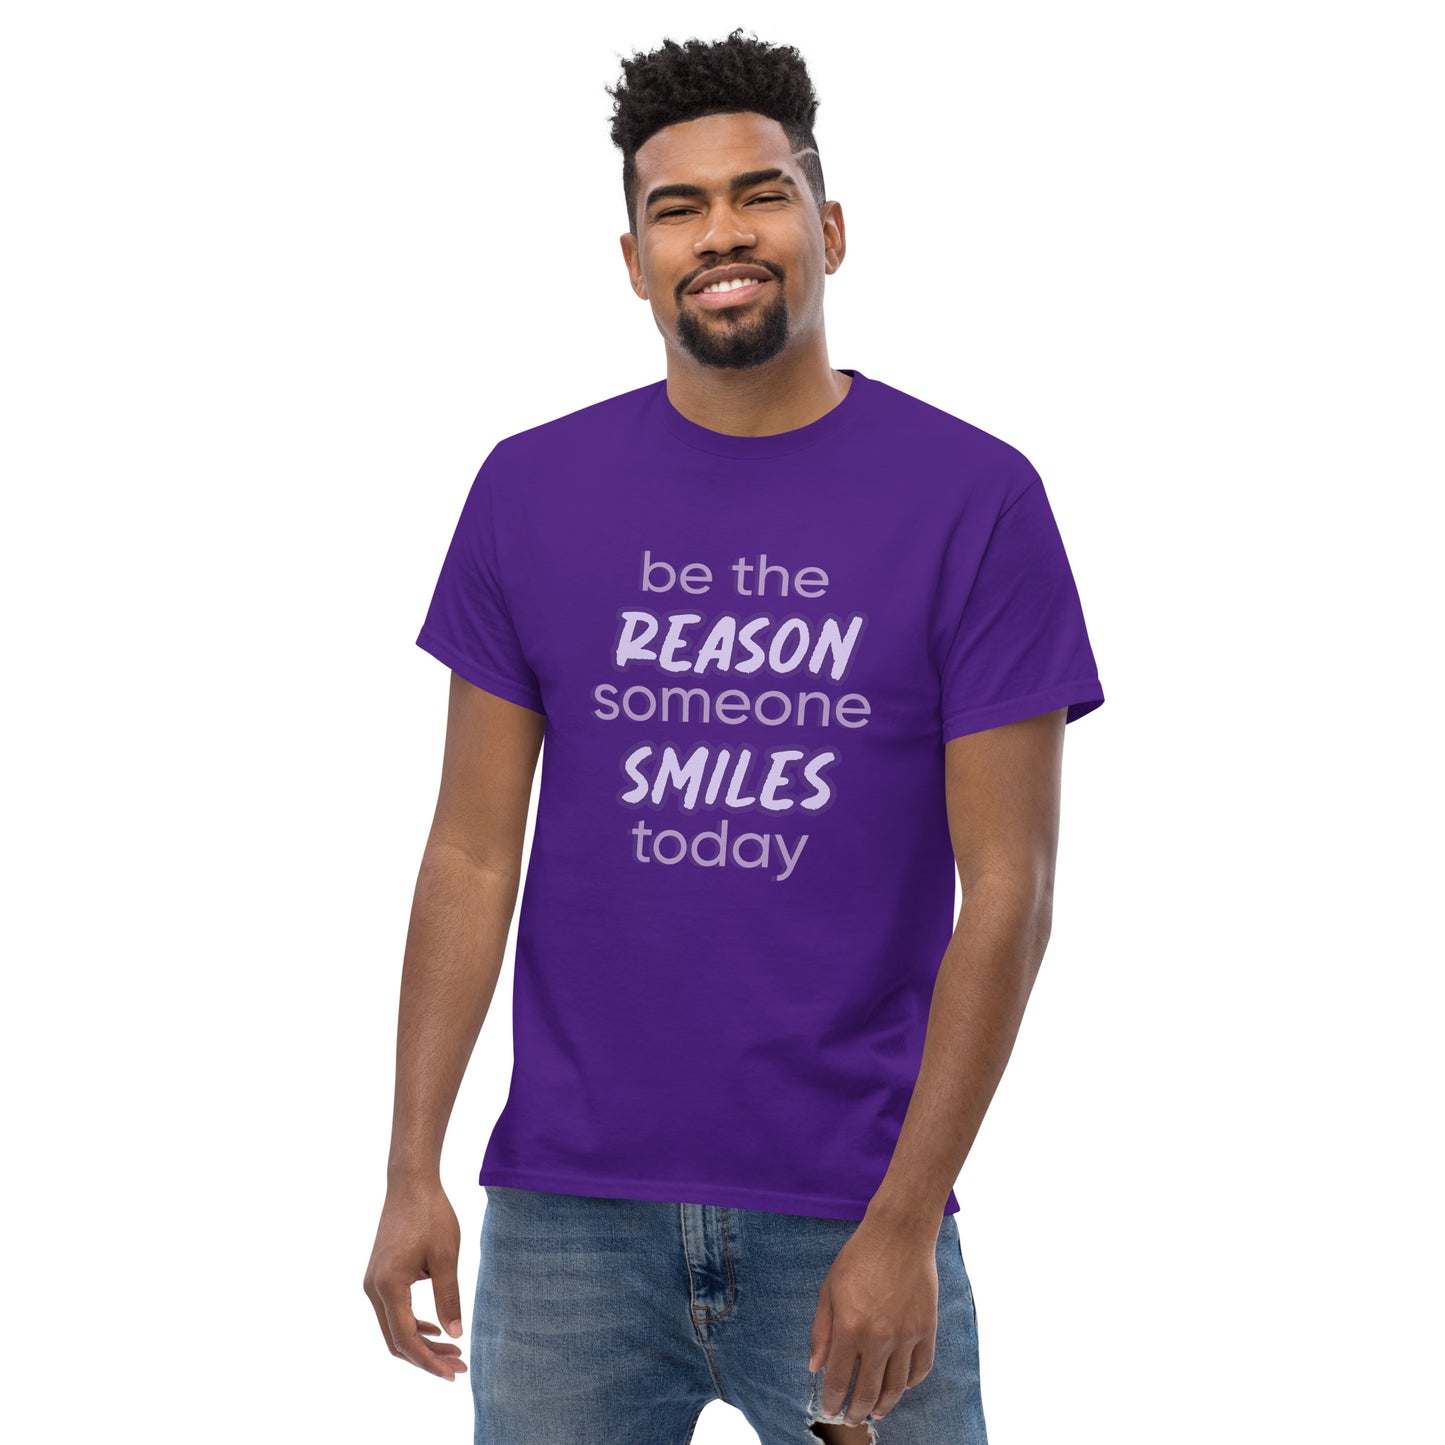 Men with purple T-shirt and the quote "be the reason someone smiles today" in purple on it. 